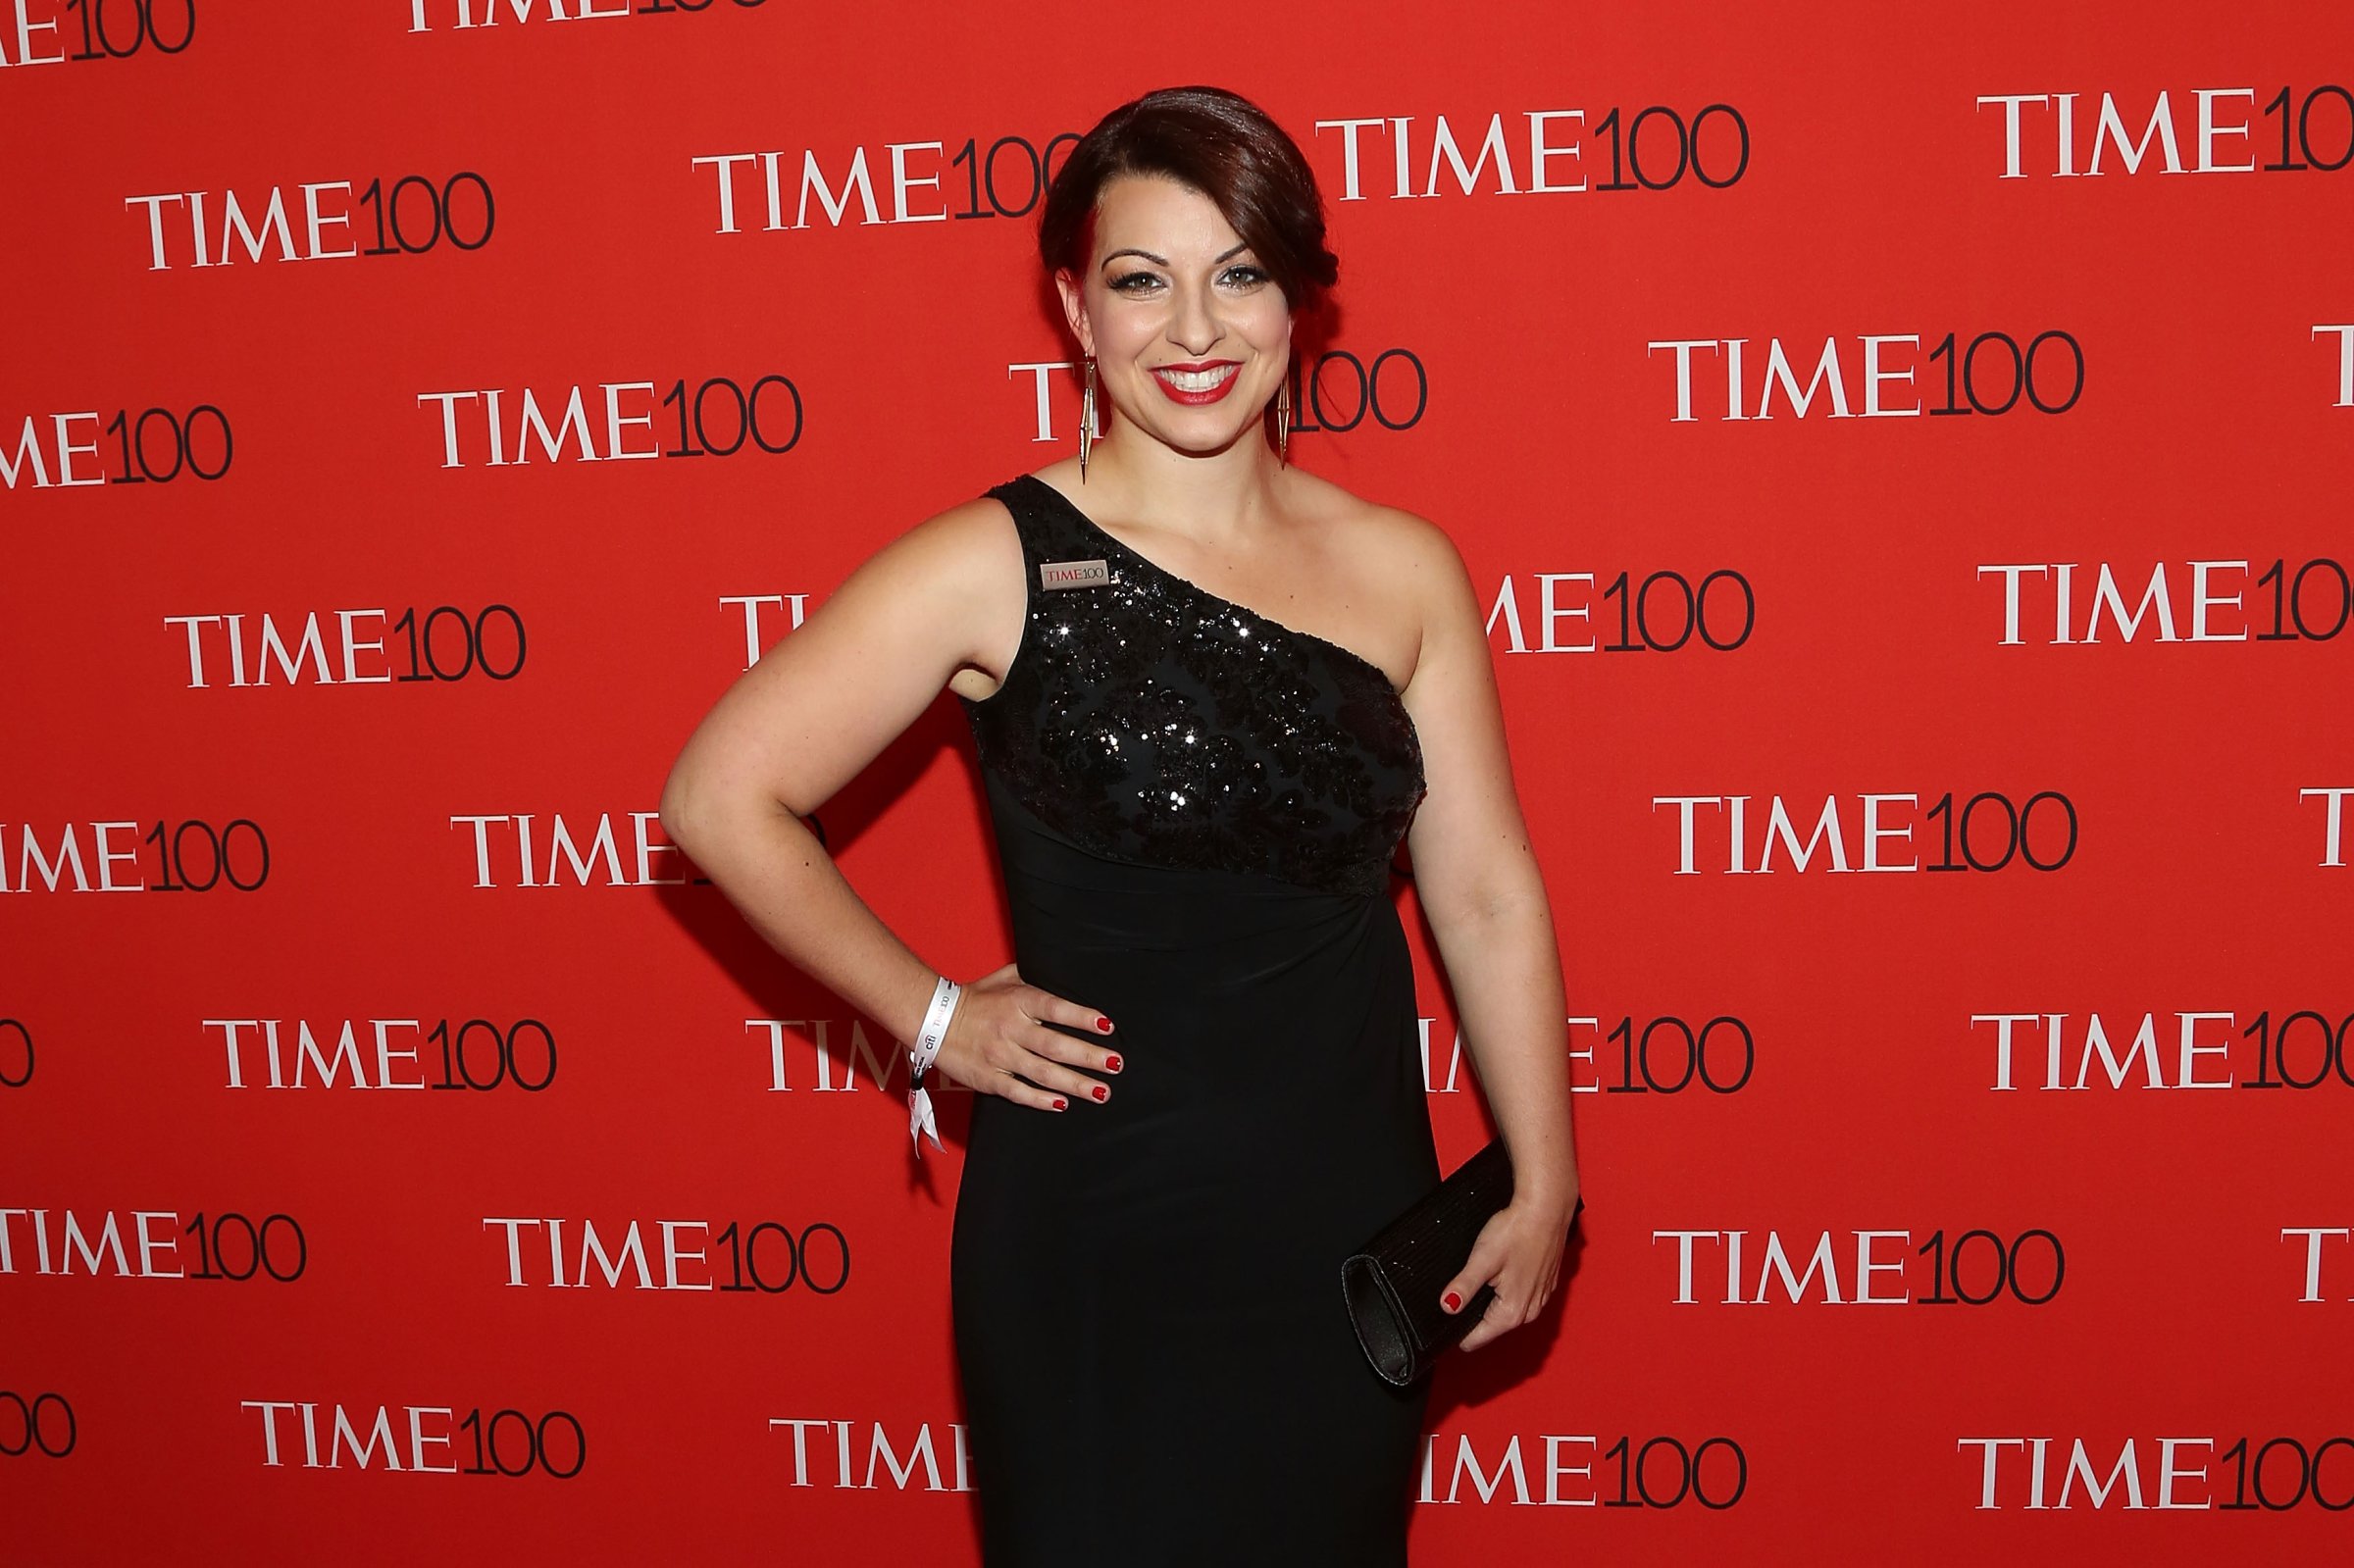 Blogger Anita Sarkeesian attends the 2015 Time 100 Gala at Frederick P. Rose Hall, Jazz at Lincoln Center in New York City on April 21, 2015.